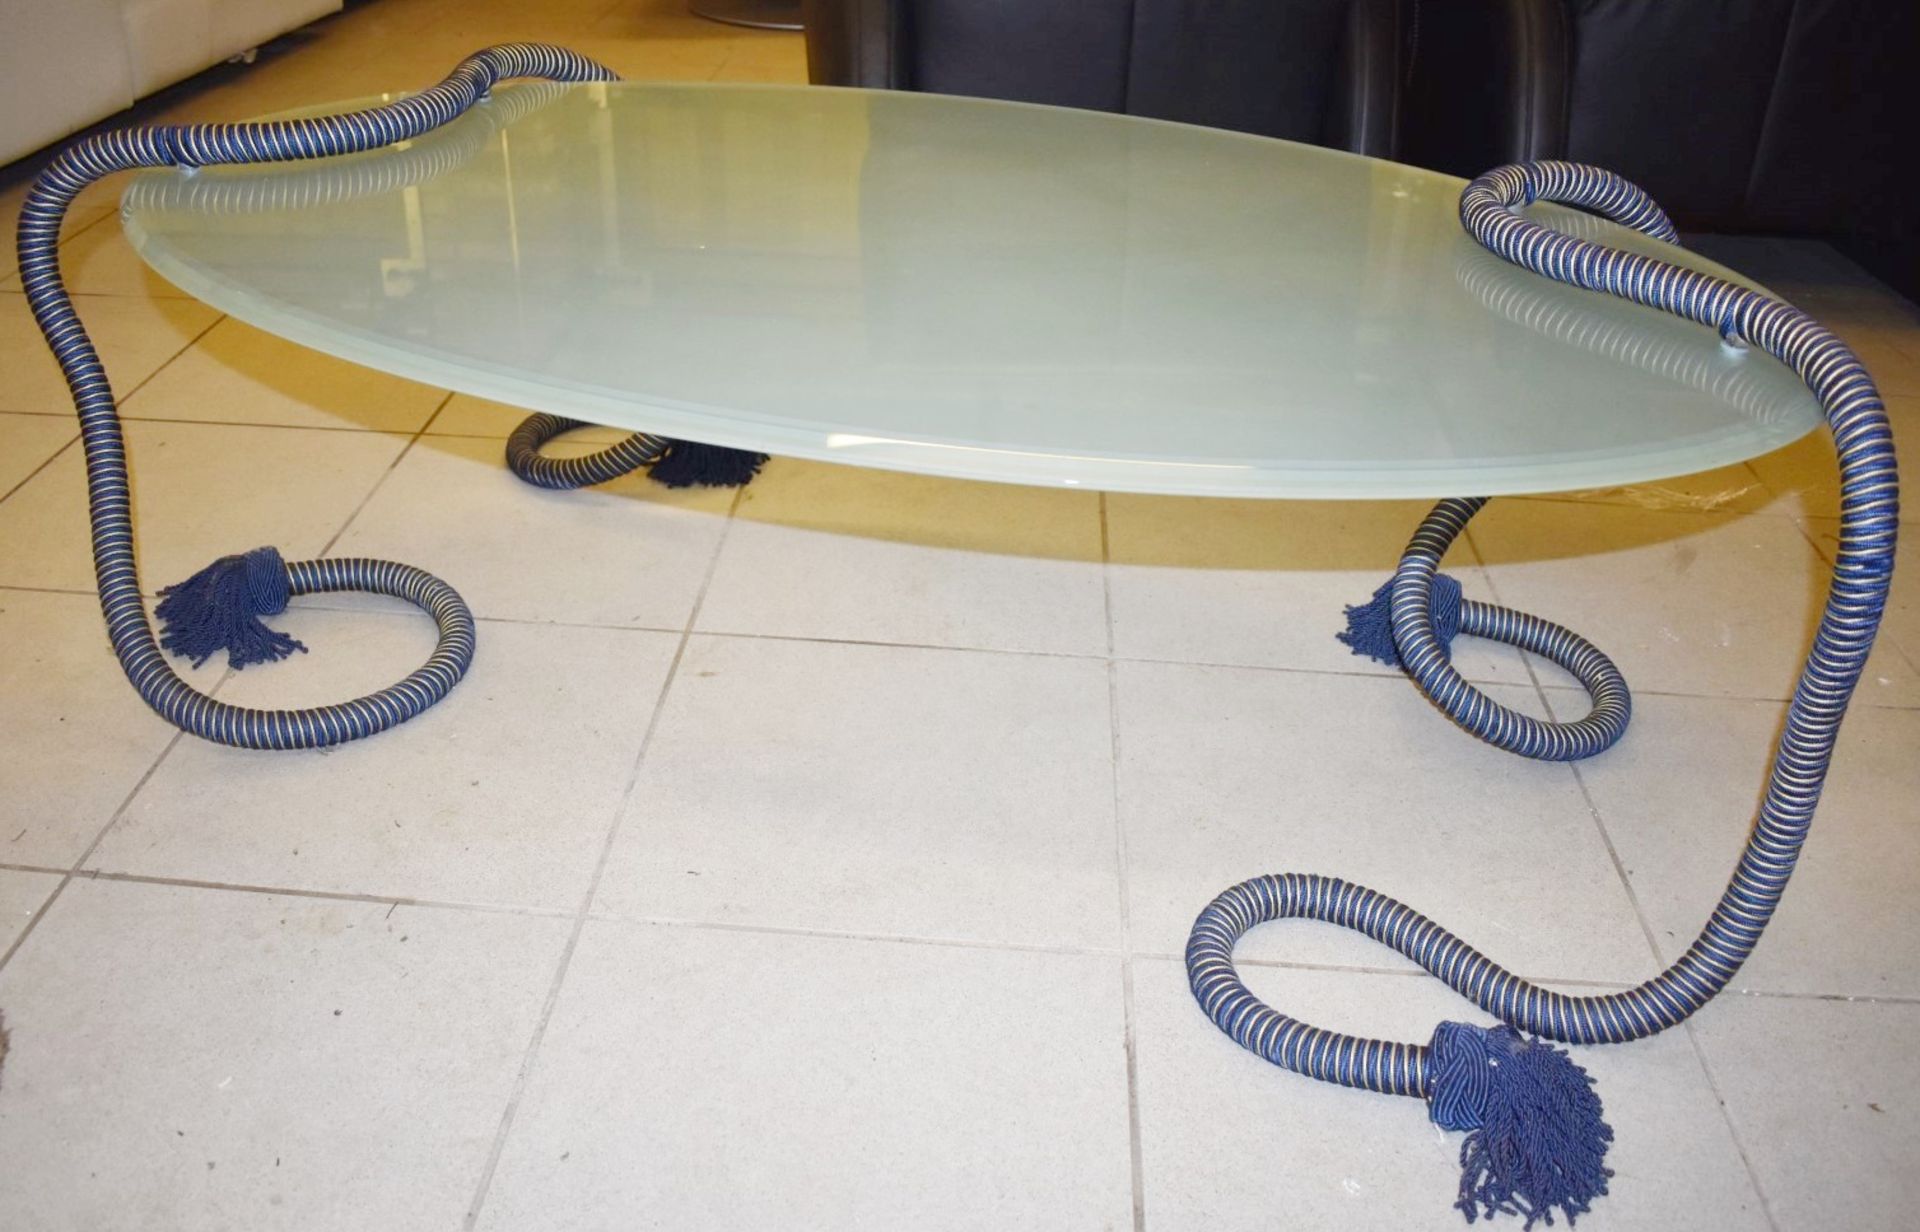 1 x Smoked Glass Coffee Table - Elevated Design With Rope Legs - To Be Removed From an Exclusive